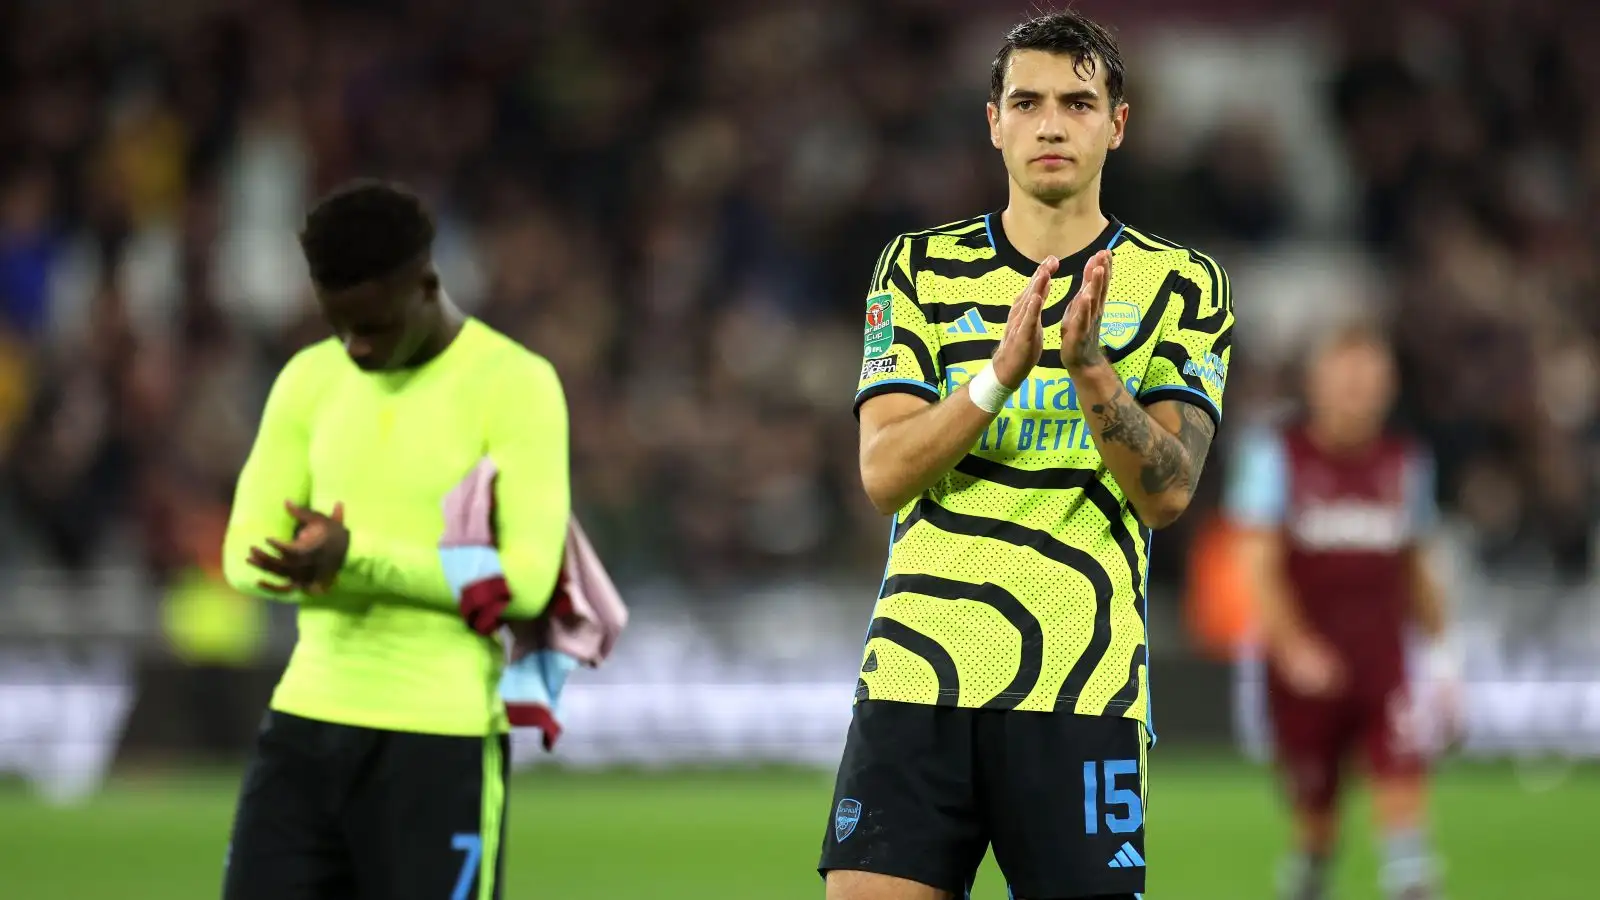 Arsenal protector Jakub Kiwior praises the fans after a defeat.